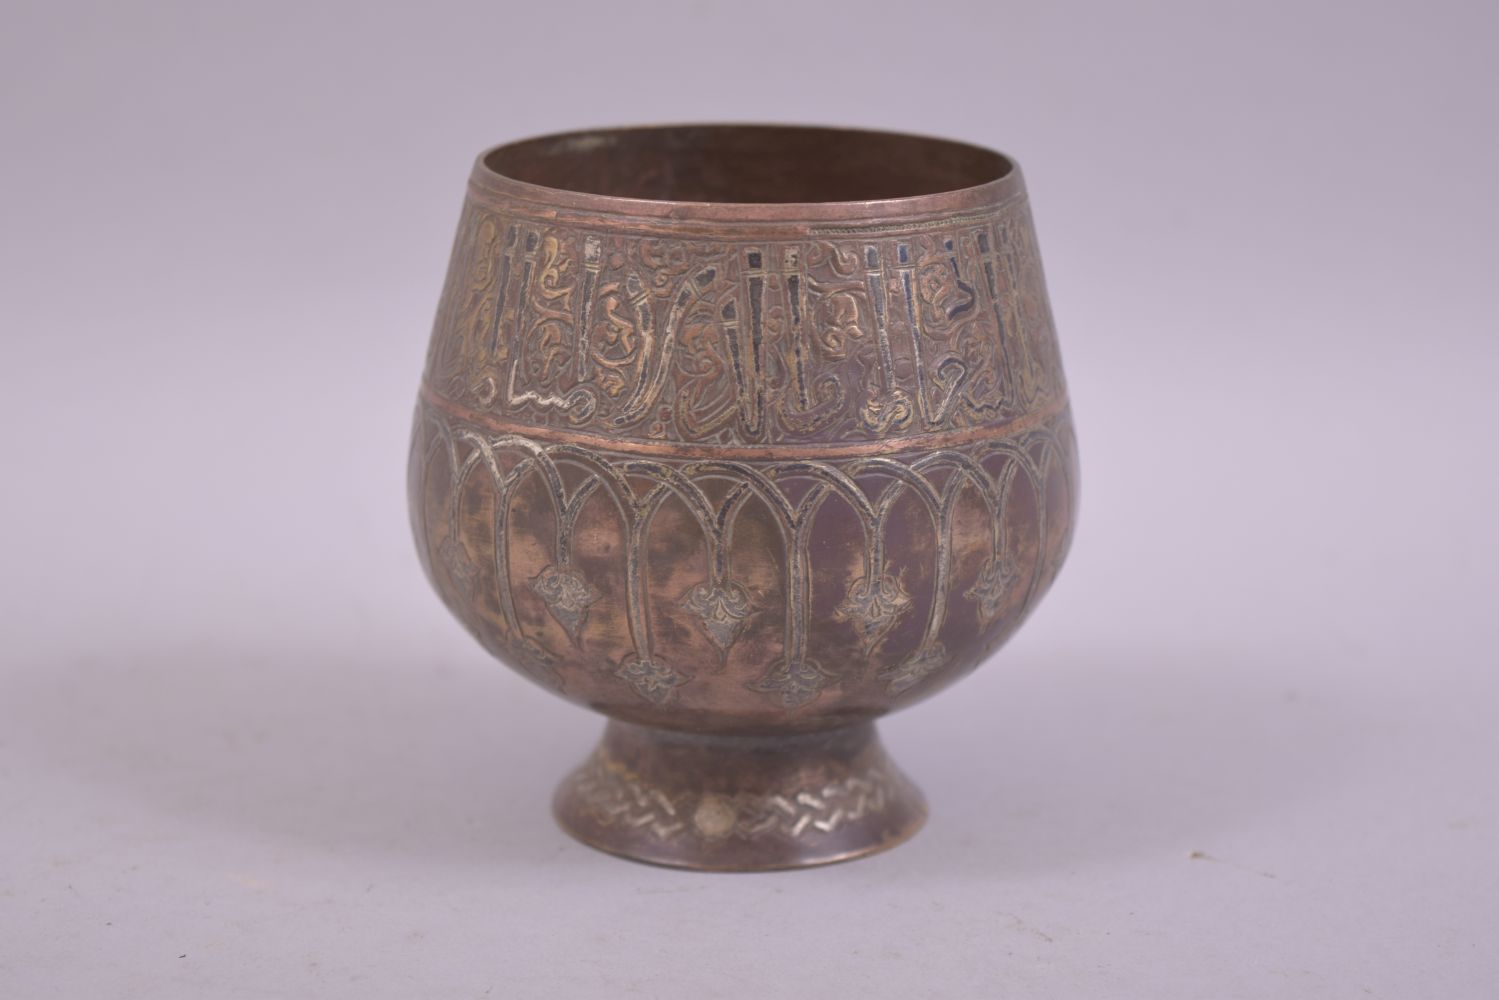 A FINE ISLAMIC SMALL BRASS SILVER AND COPPER OVERLAID GOBLET, 8.5cm high. - Image 2 of 6